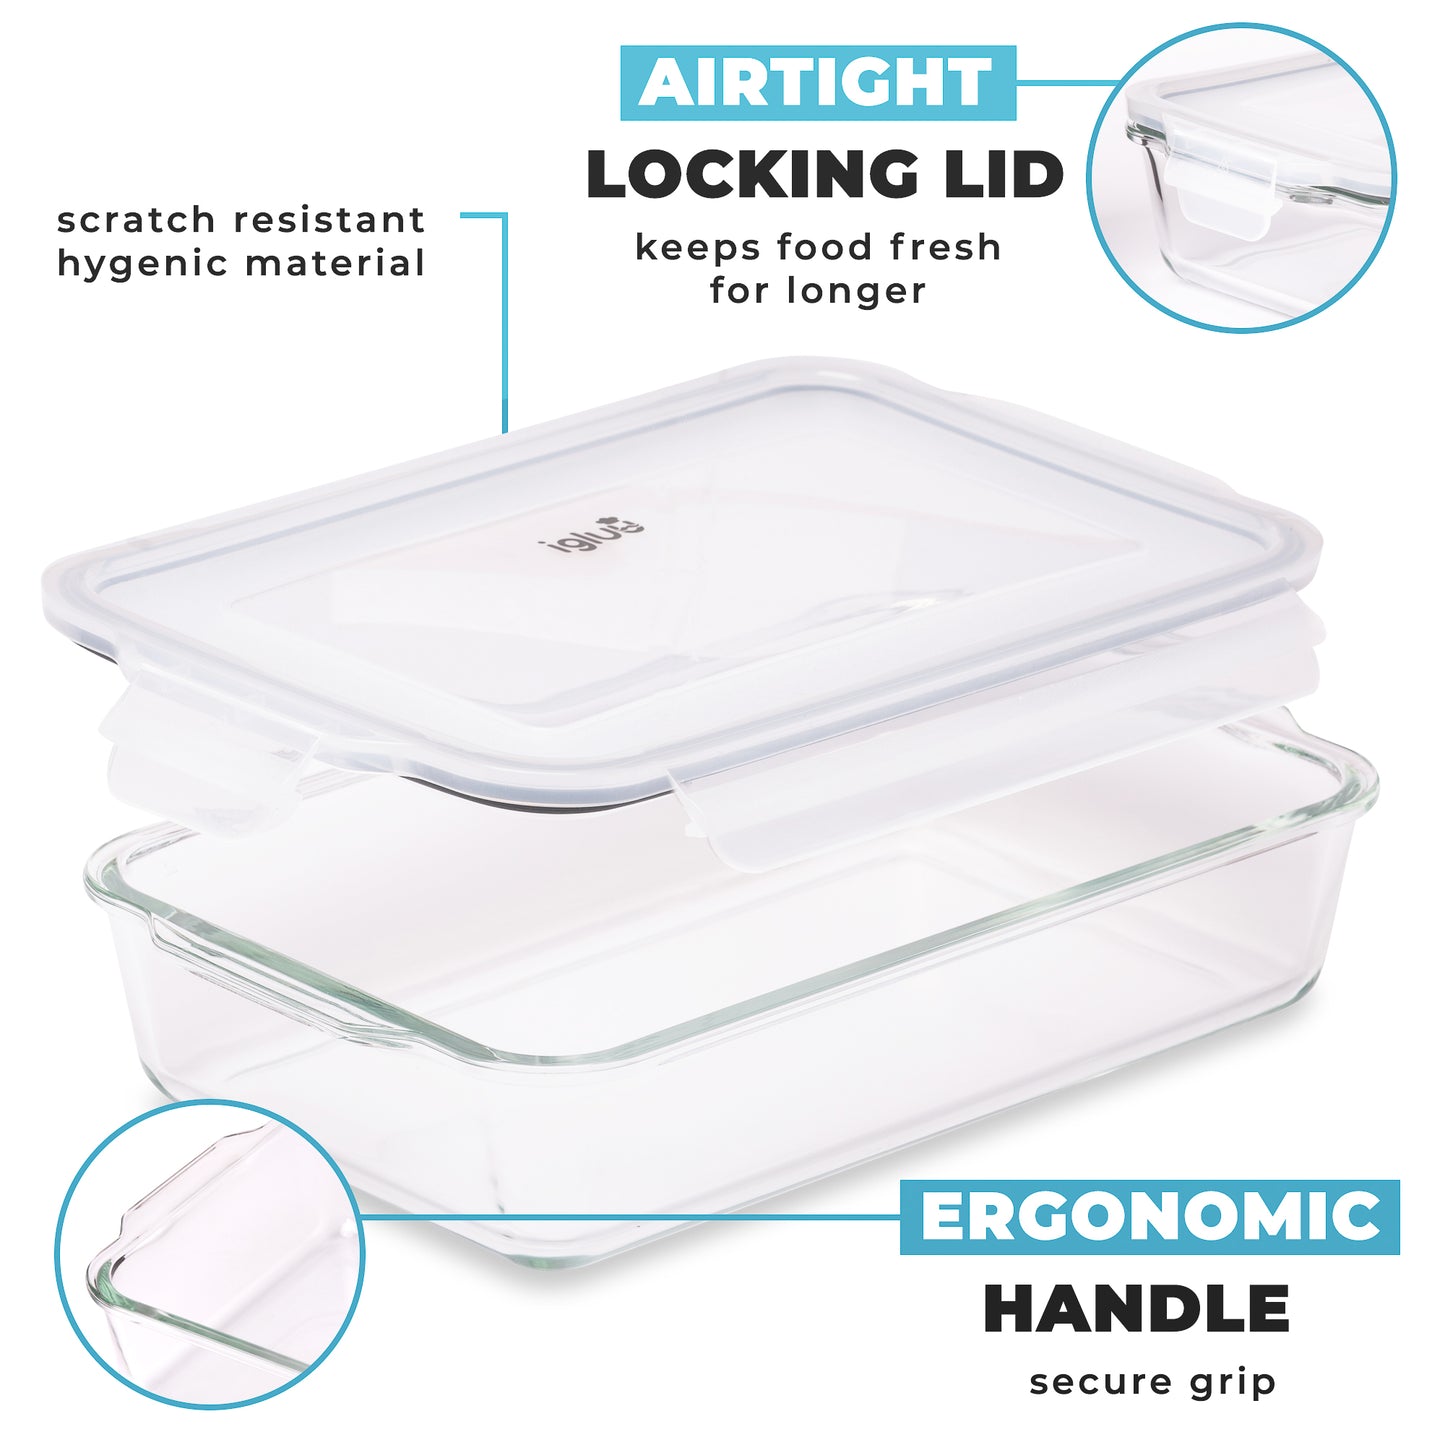 Glass Lasagne Dish with Lid - 2.2 litre